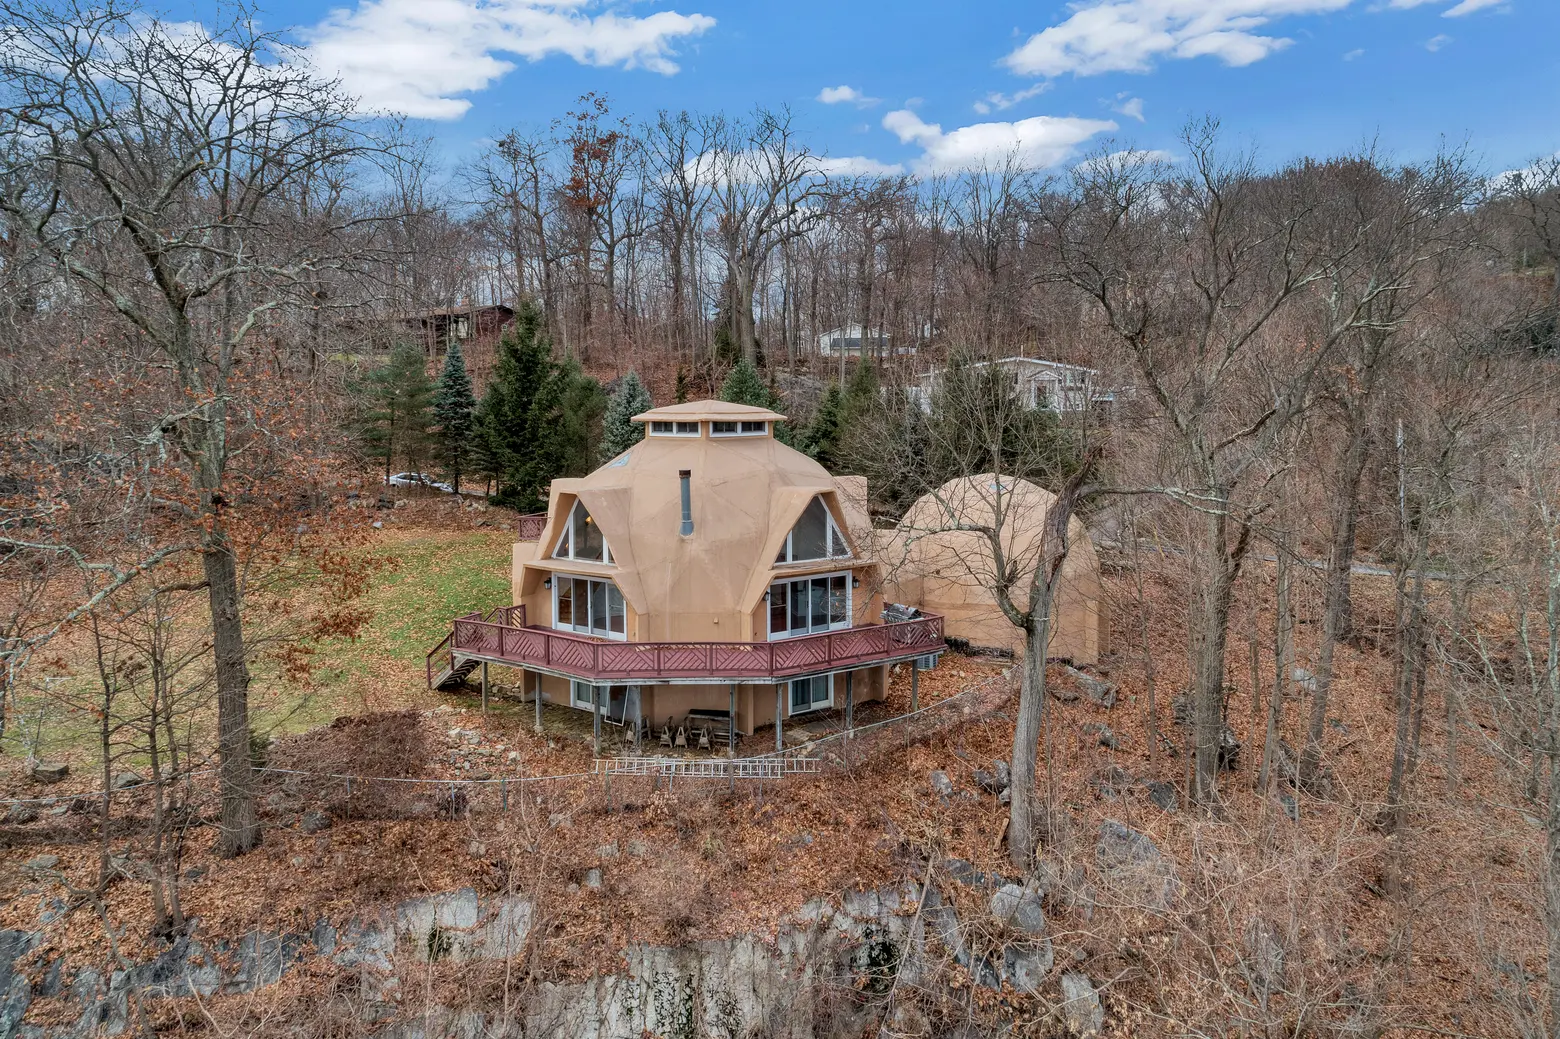 25 Hillside Avenue, geodesic dome, upstate, cool listings, quirky homes